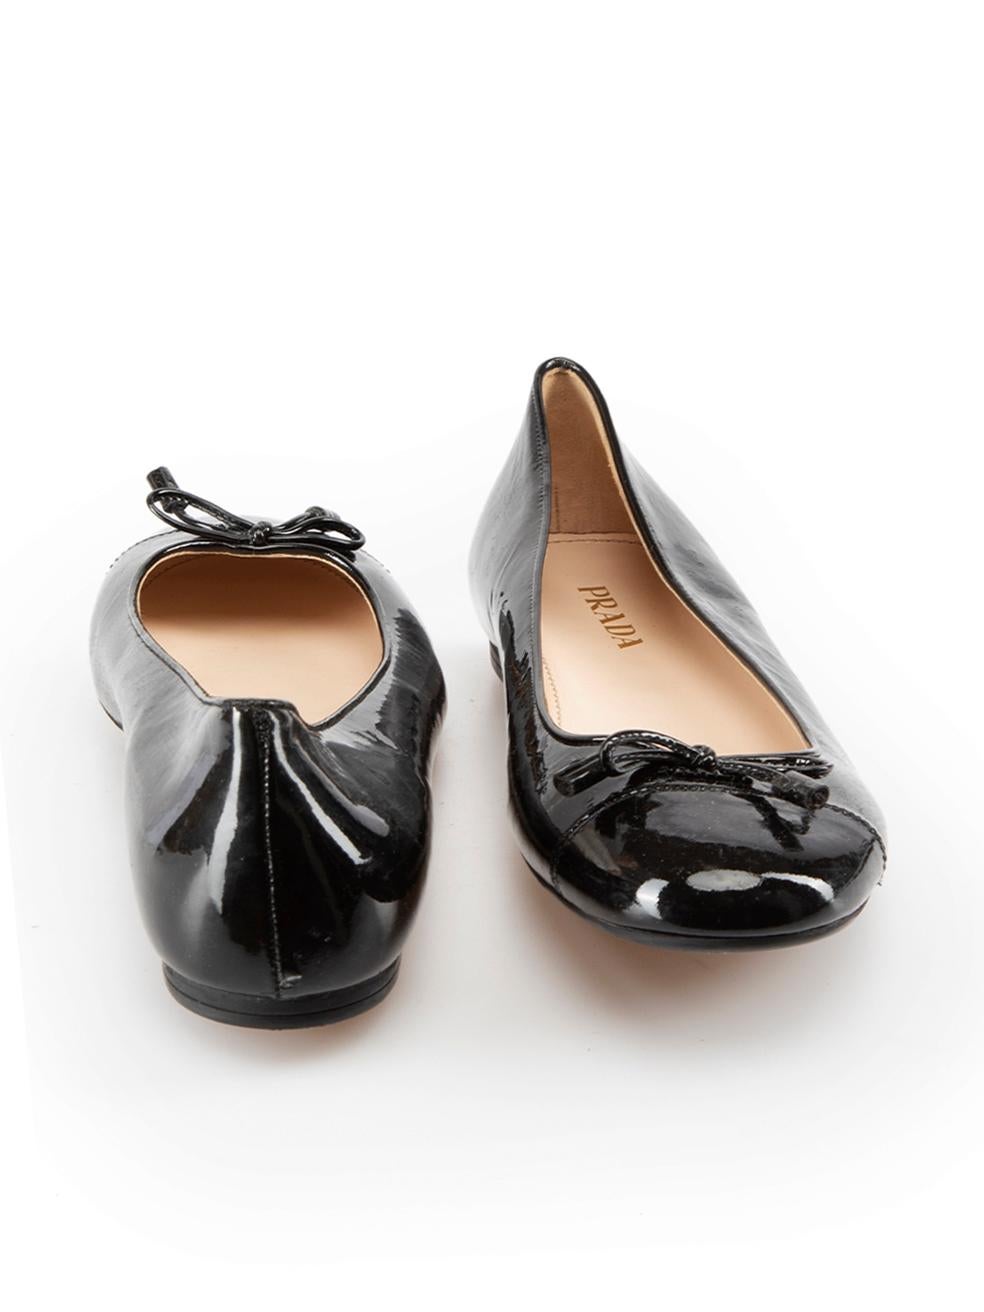 Prada Black Patent Bow Accent Ballet Flats Size IT 38.5 In Excellent Condition For Sale In London, GB